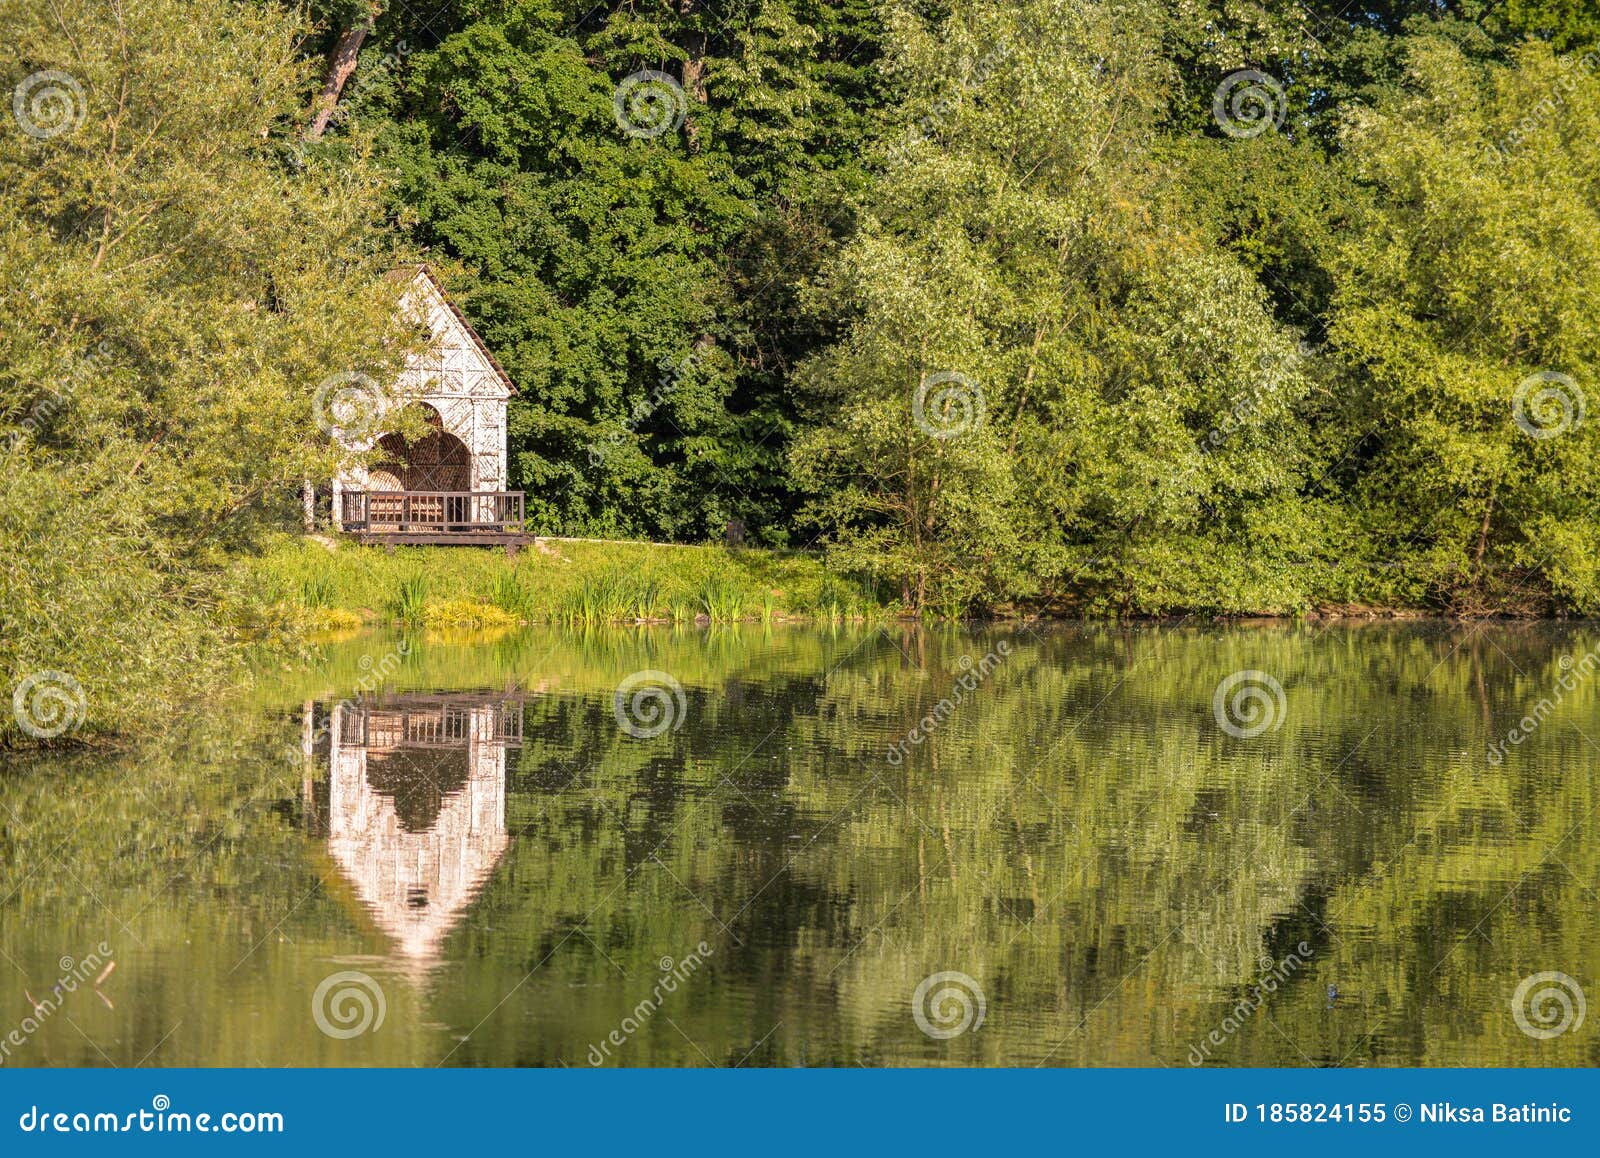 a small house by the lake